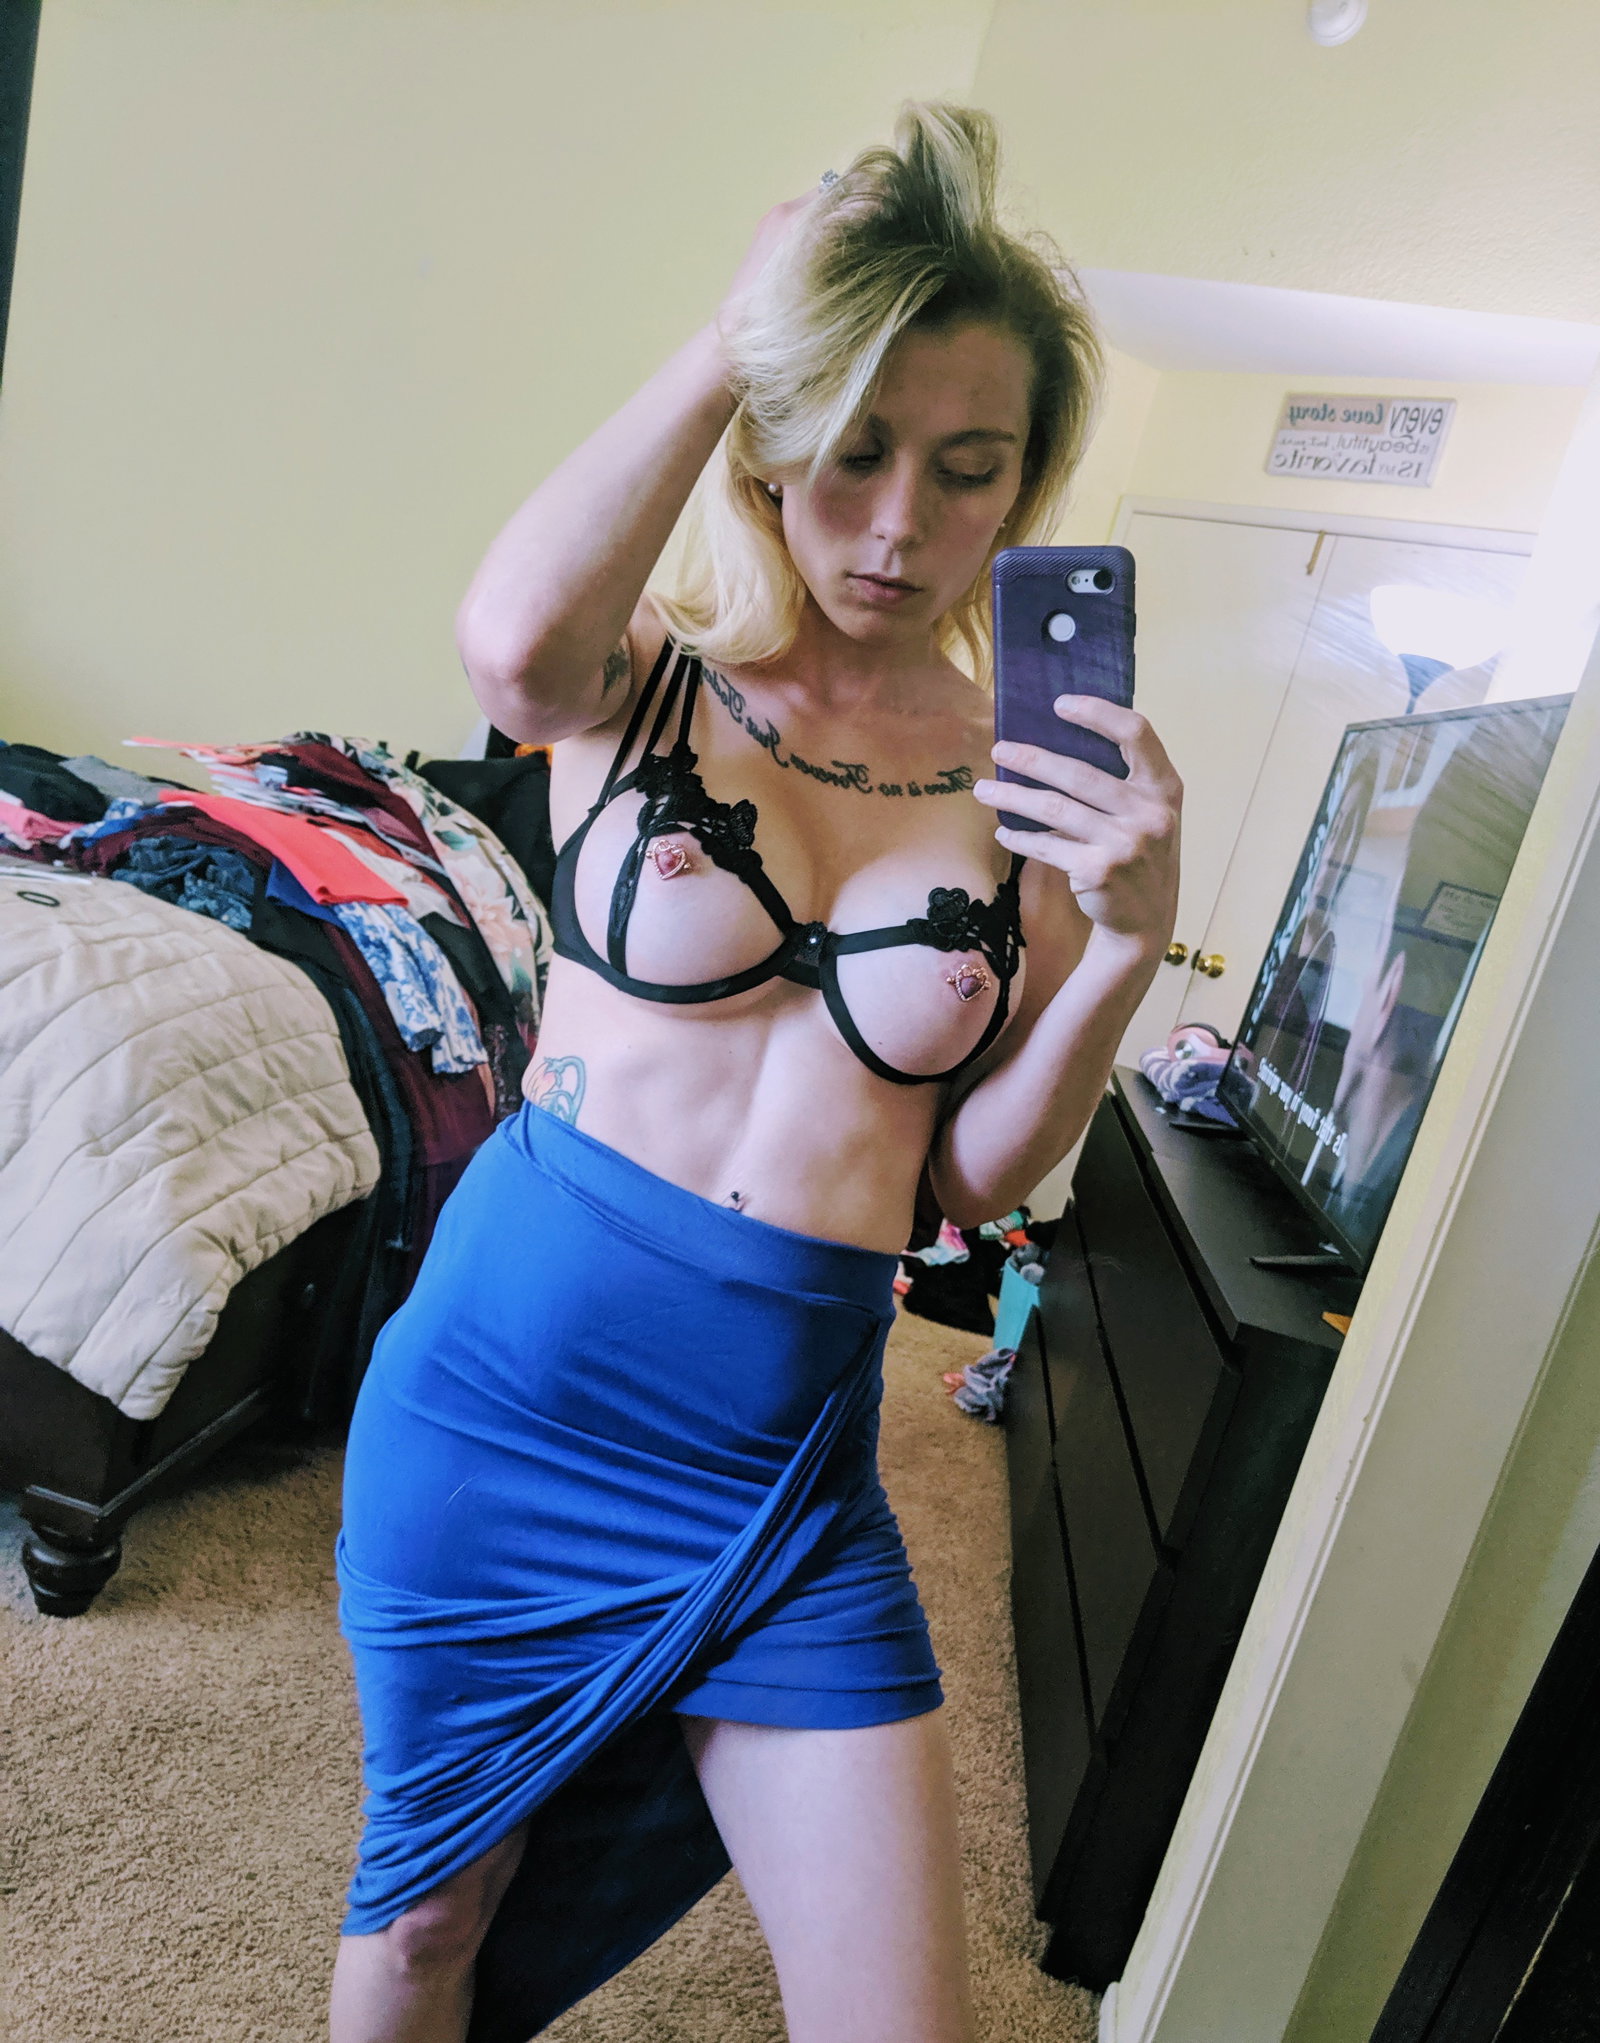 Photo by Veronica Marzzz with the username @Vmarzzz, who is a star user,  June 8, 2019 at 8:17 PM. The post is about the topic Risque' and the text says 'BlueBella Top 💙 Fiending for something new, big and hard 😈'